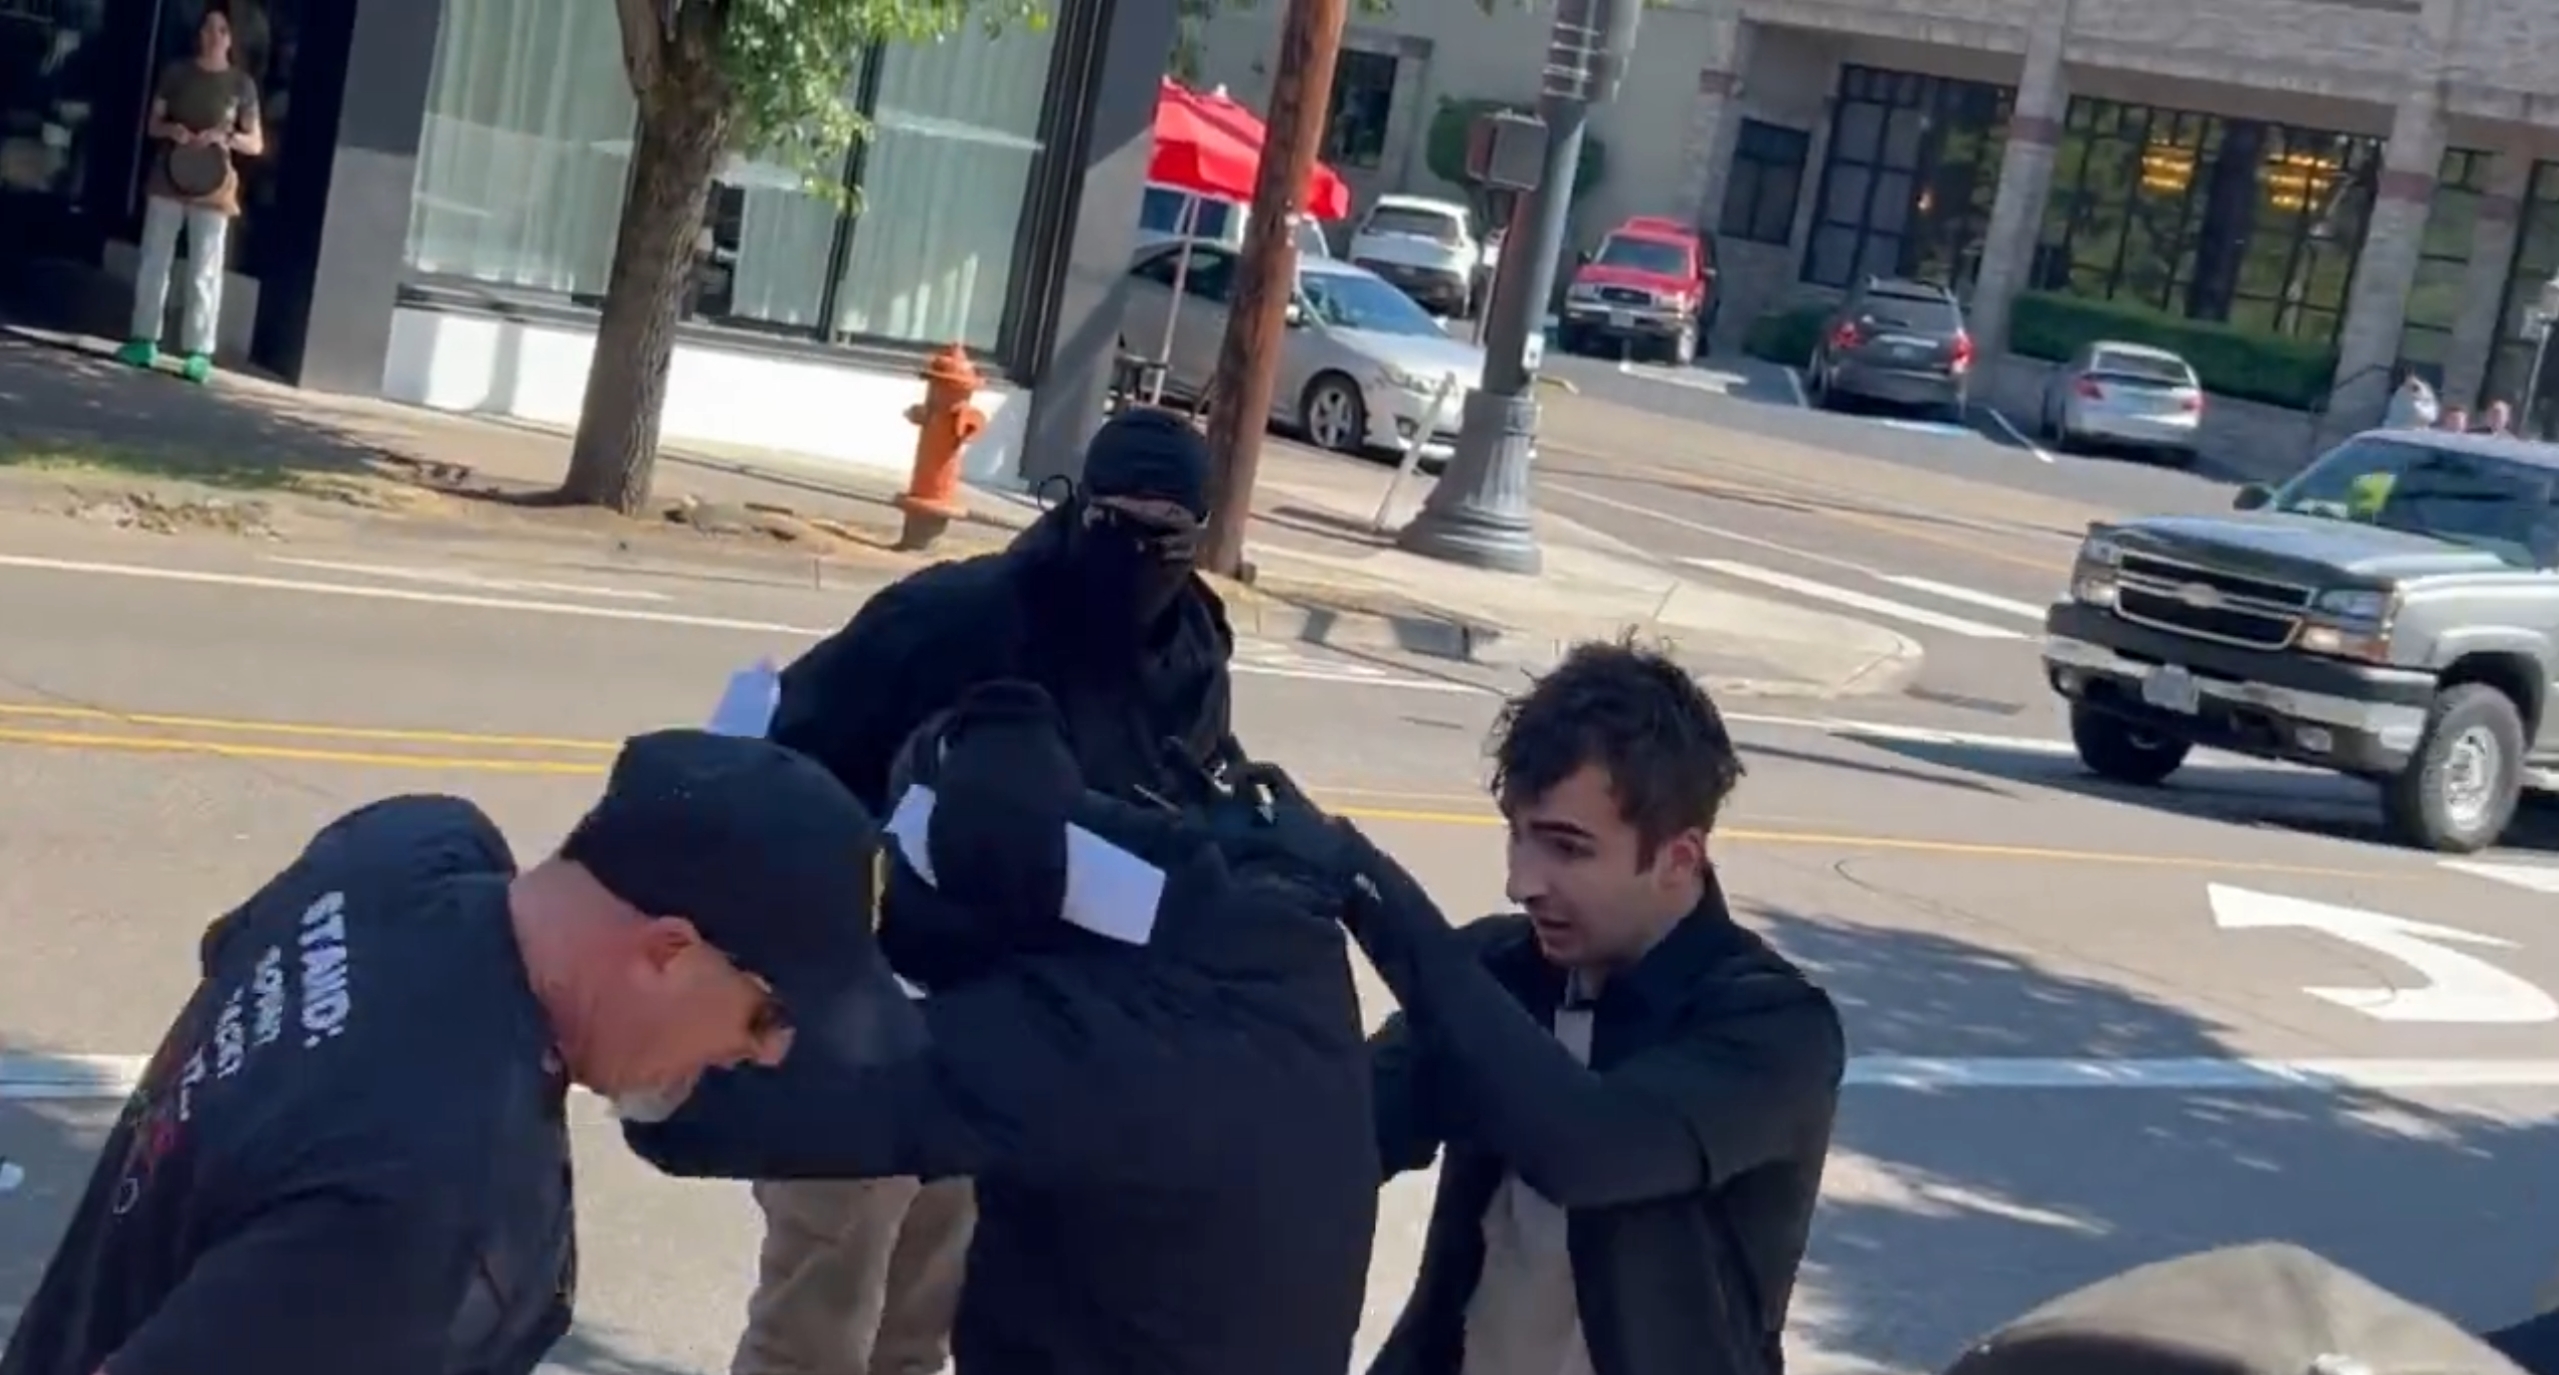 ‘GET THE F*** OUT!’ Proud Boys Surround, Unmask Neo-Nazi Rose City Nationalists in Violent Confrontation at Oregon Rally (mediaite.com)